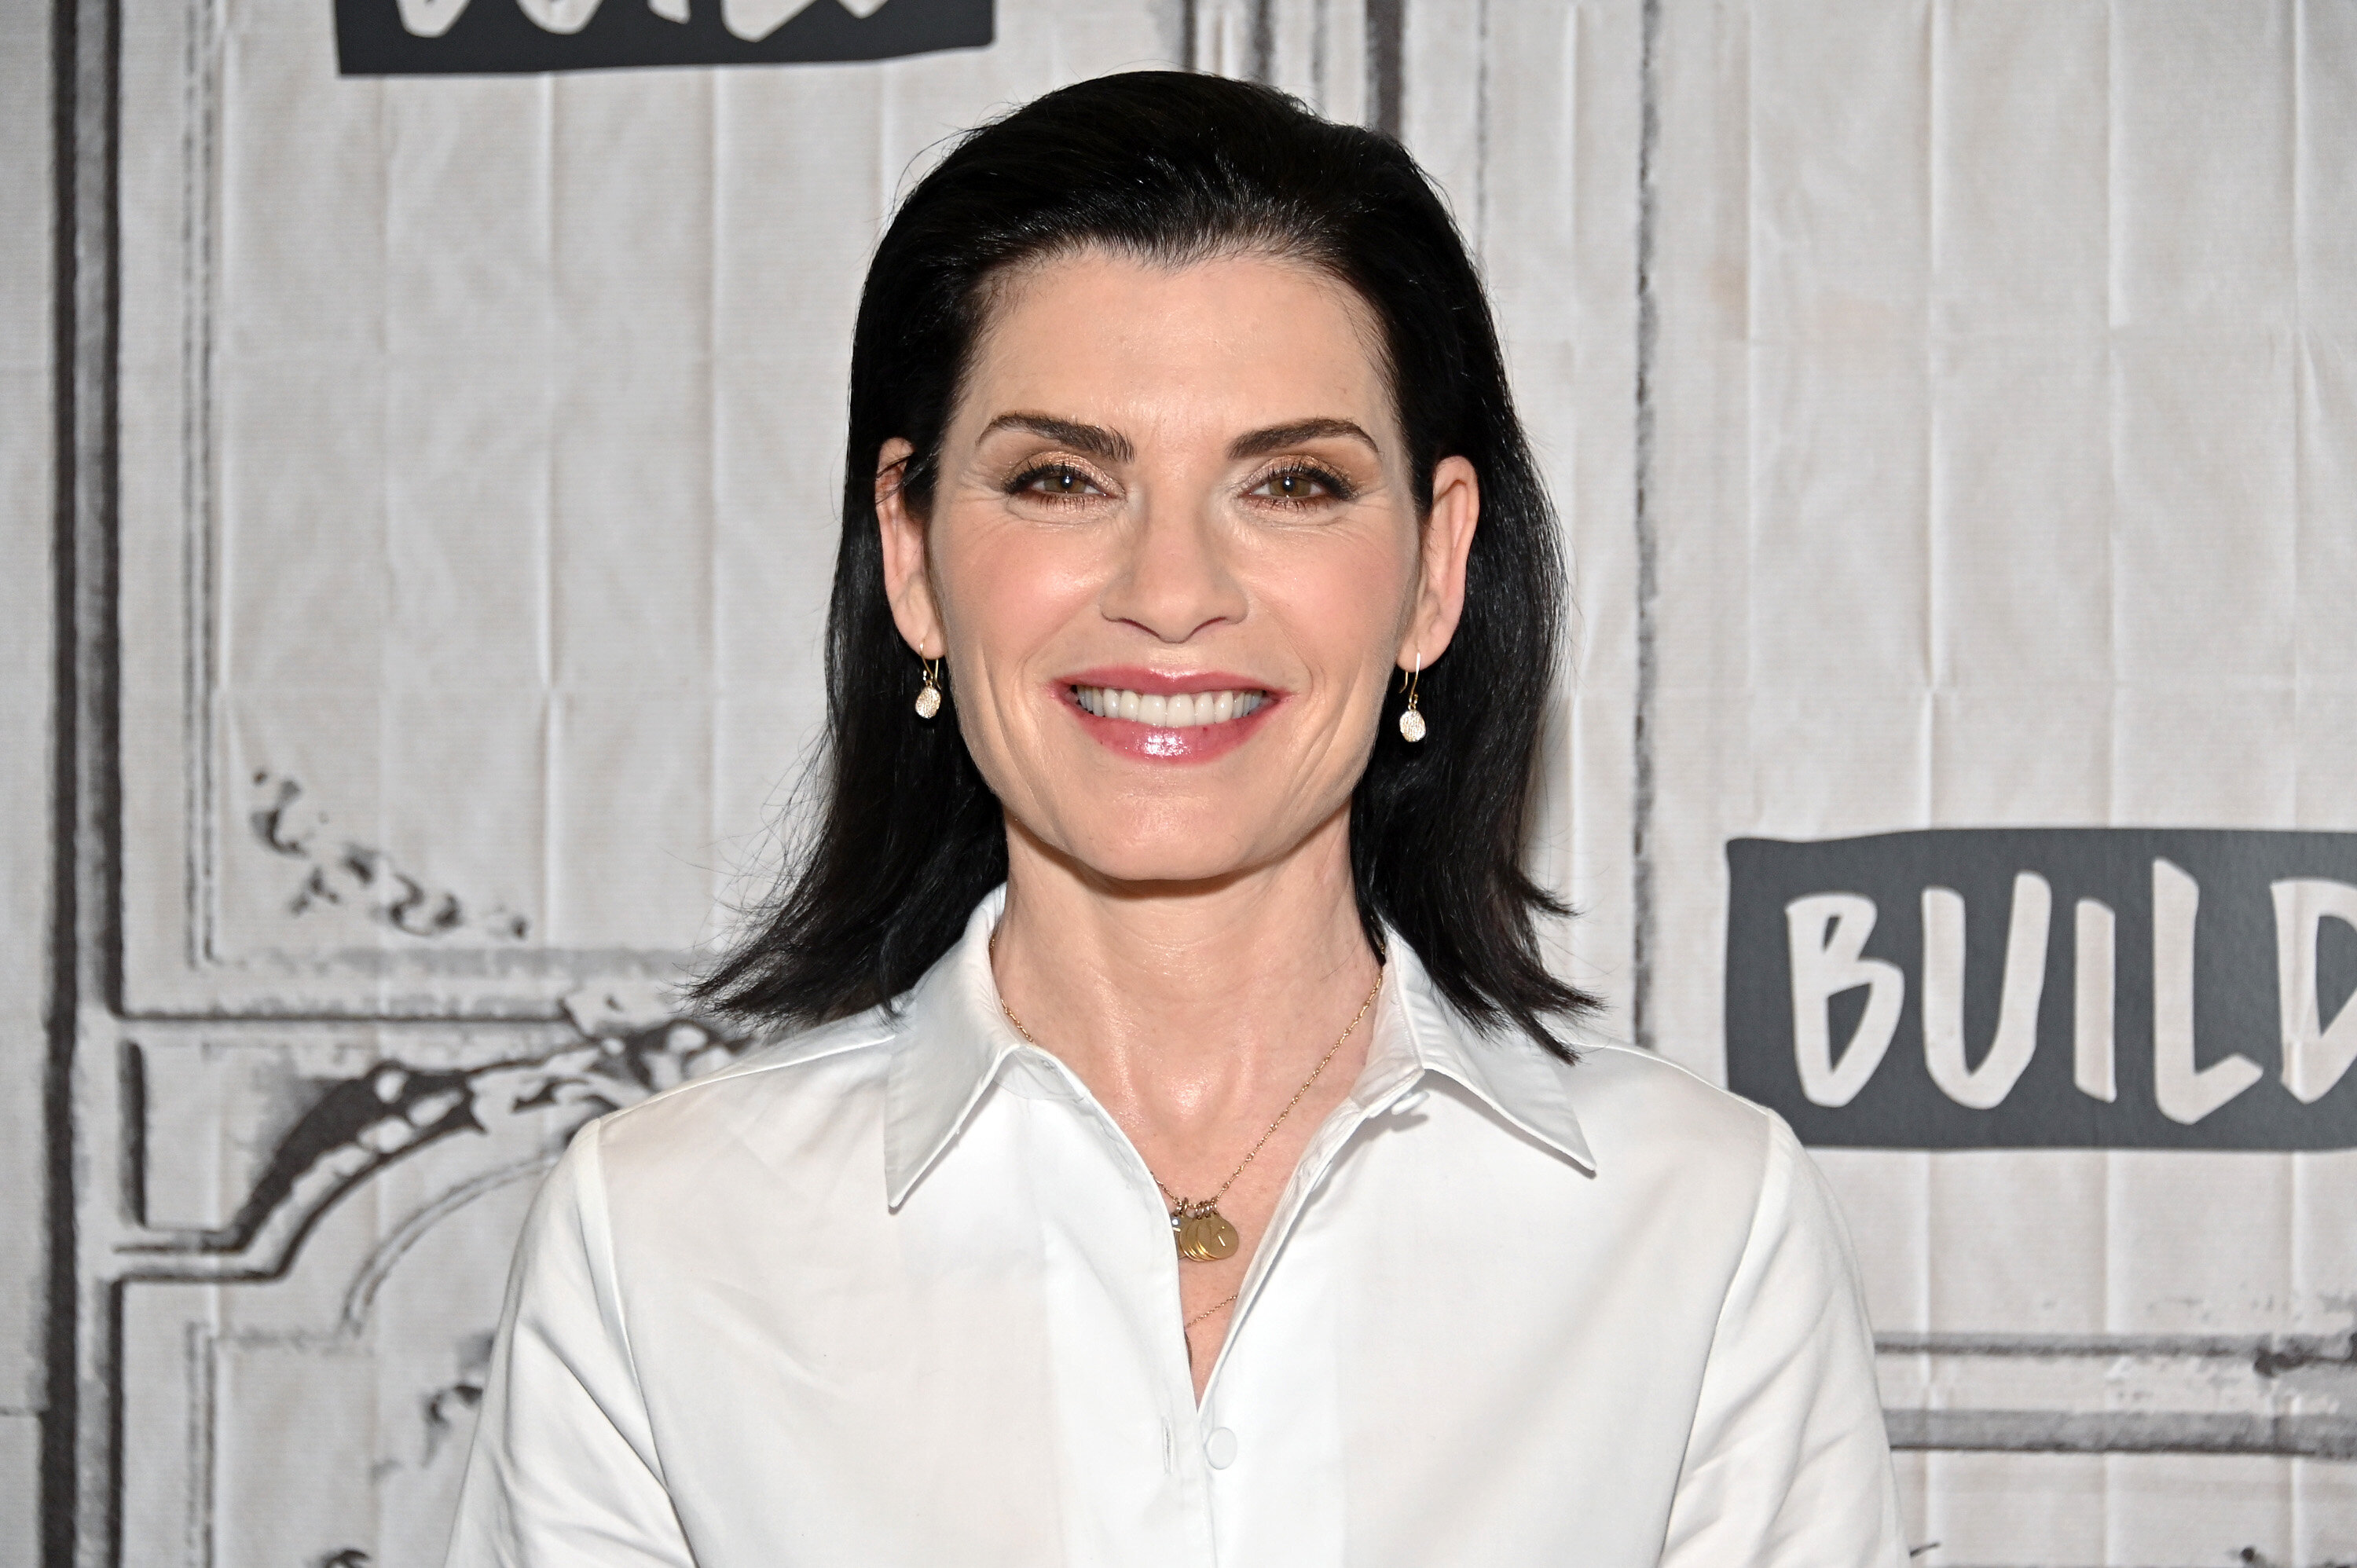 Julianna Margulies discusses her new show, "The Hot Zone," on May 23, 2019, at Build Studio in New York City. (Photo: Dia Dipasupil/Getty Images)